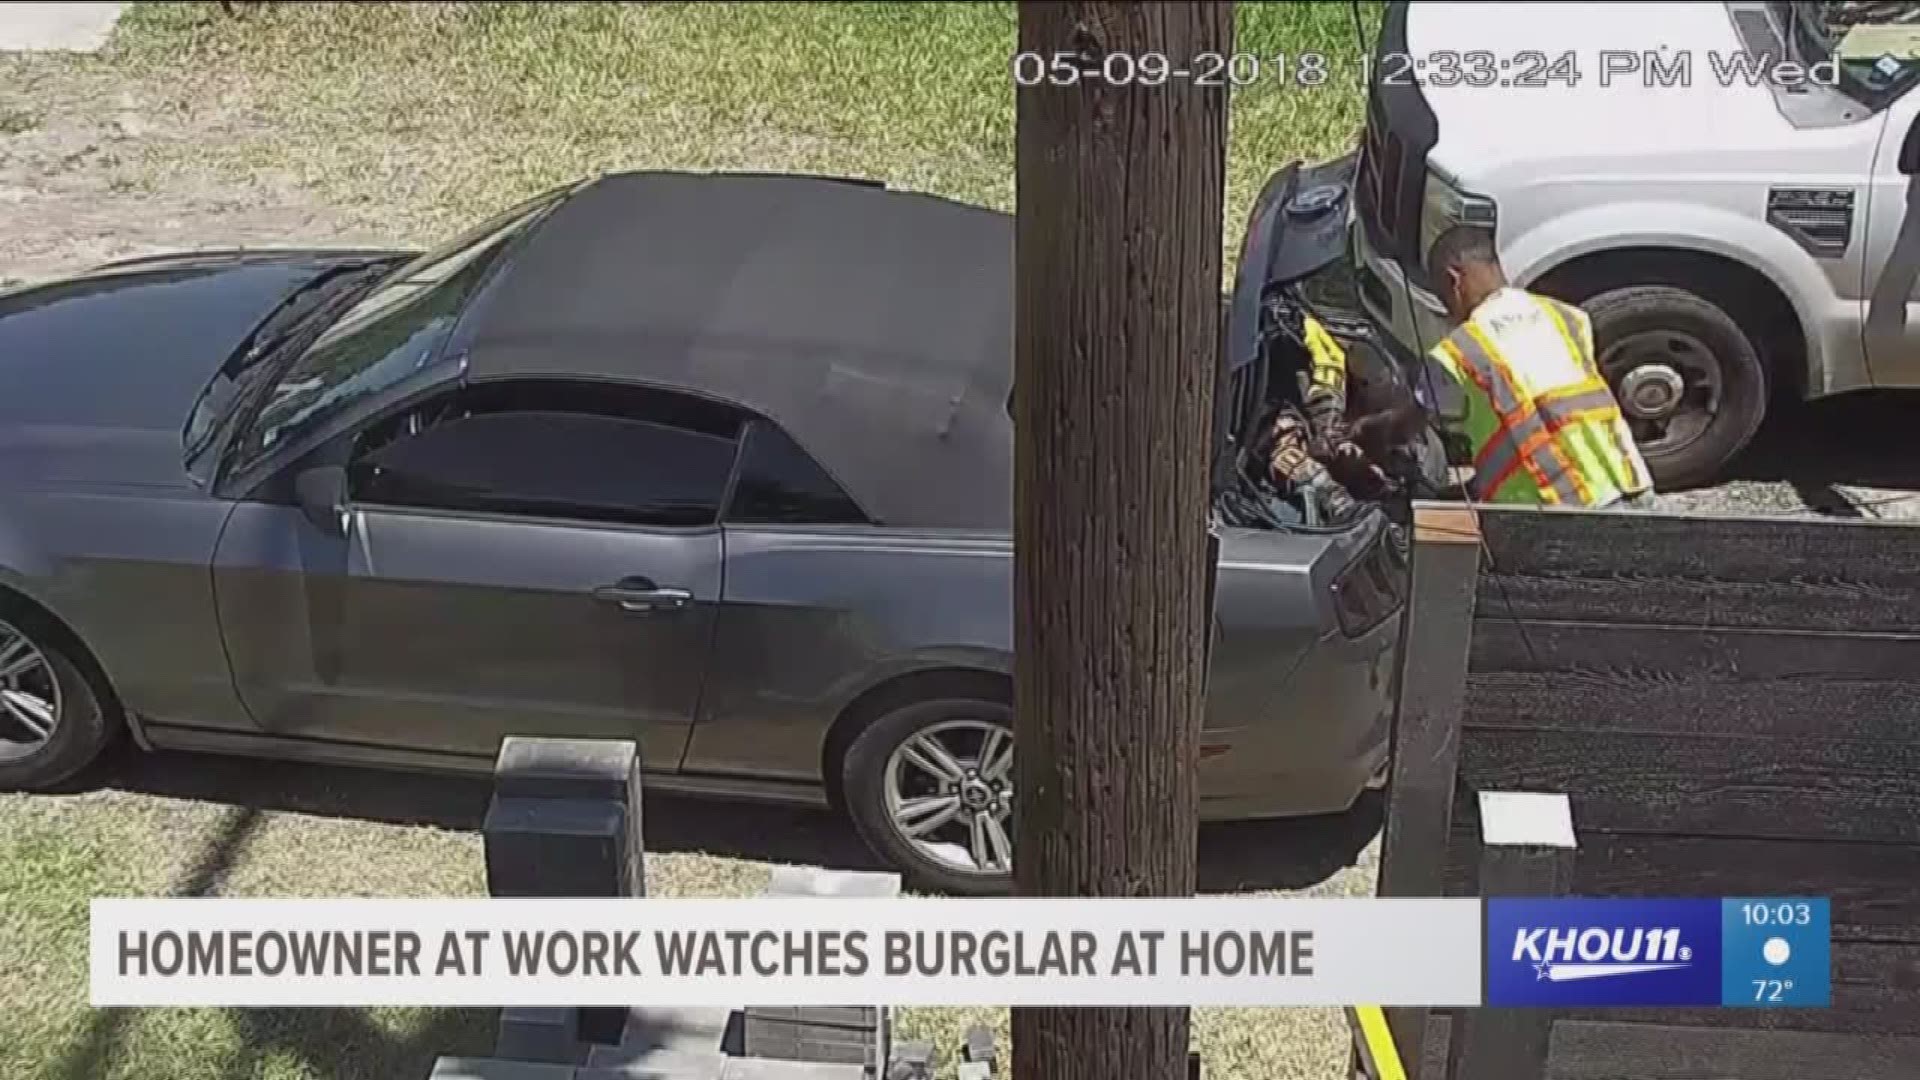 A radio personality was at work when he checked his surveillance cameras at his home and saw a burglar stealing construction equipment from his property. 